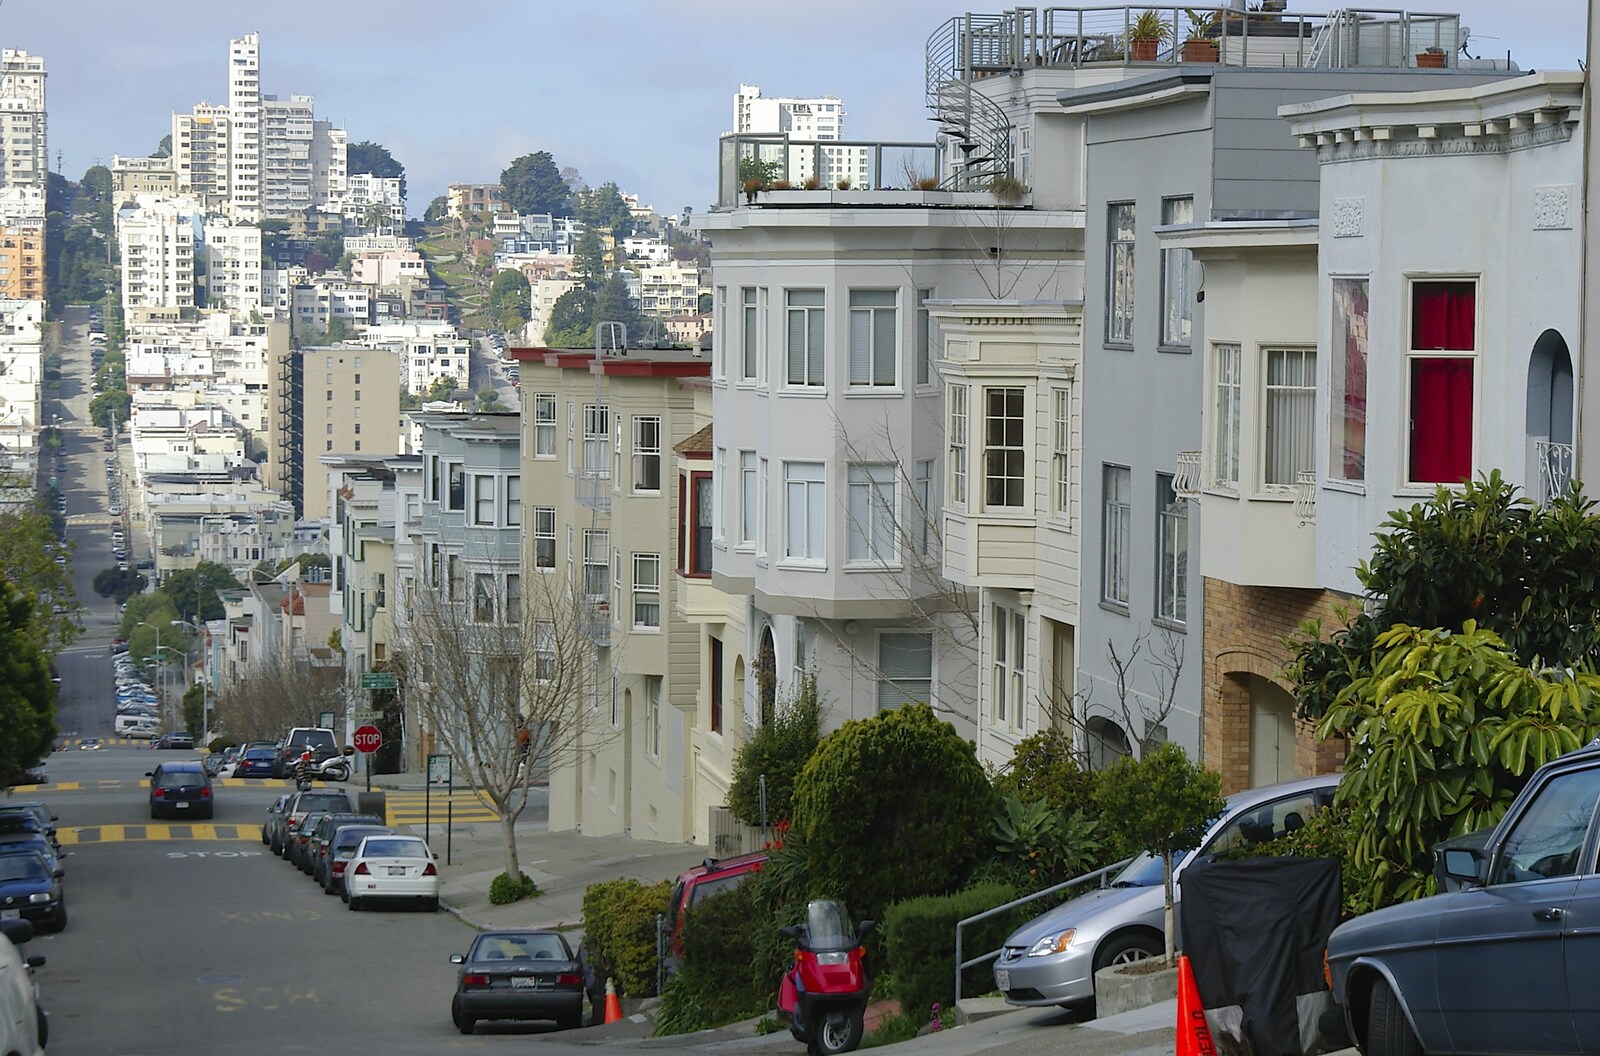 More nice houses from Chinatown, Telegraph Hill and Fisherman's Wharf, San Francisco, California, US - 11th March 2006